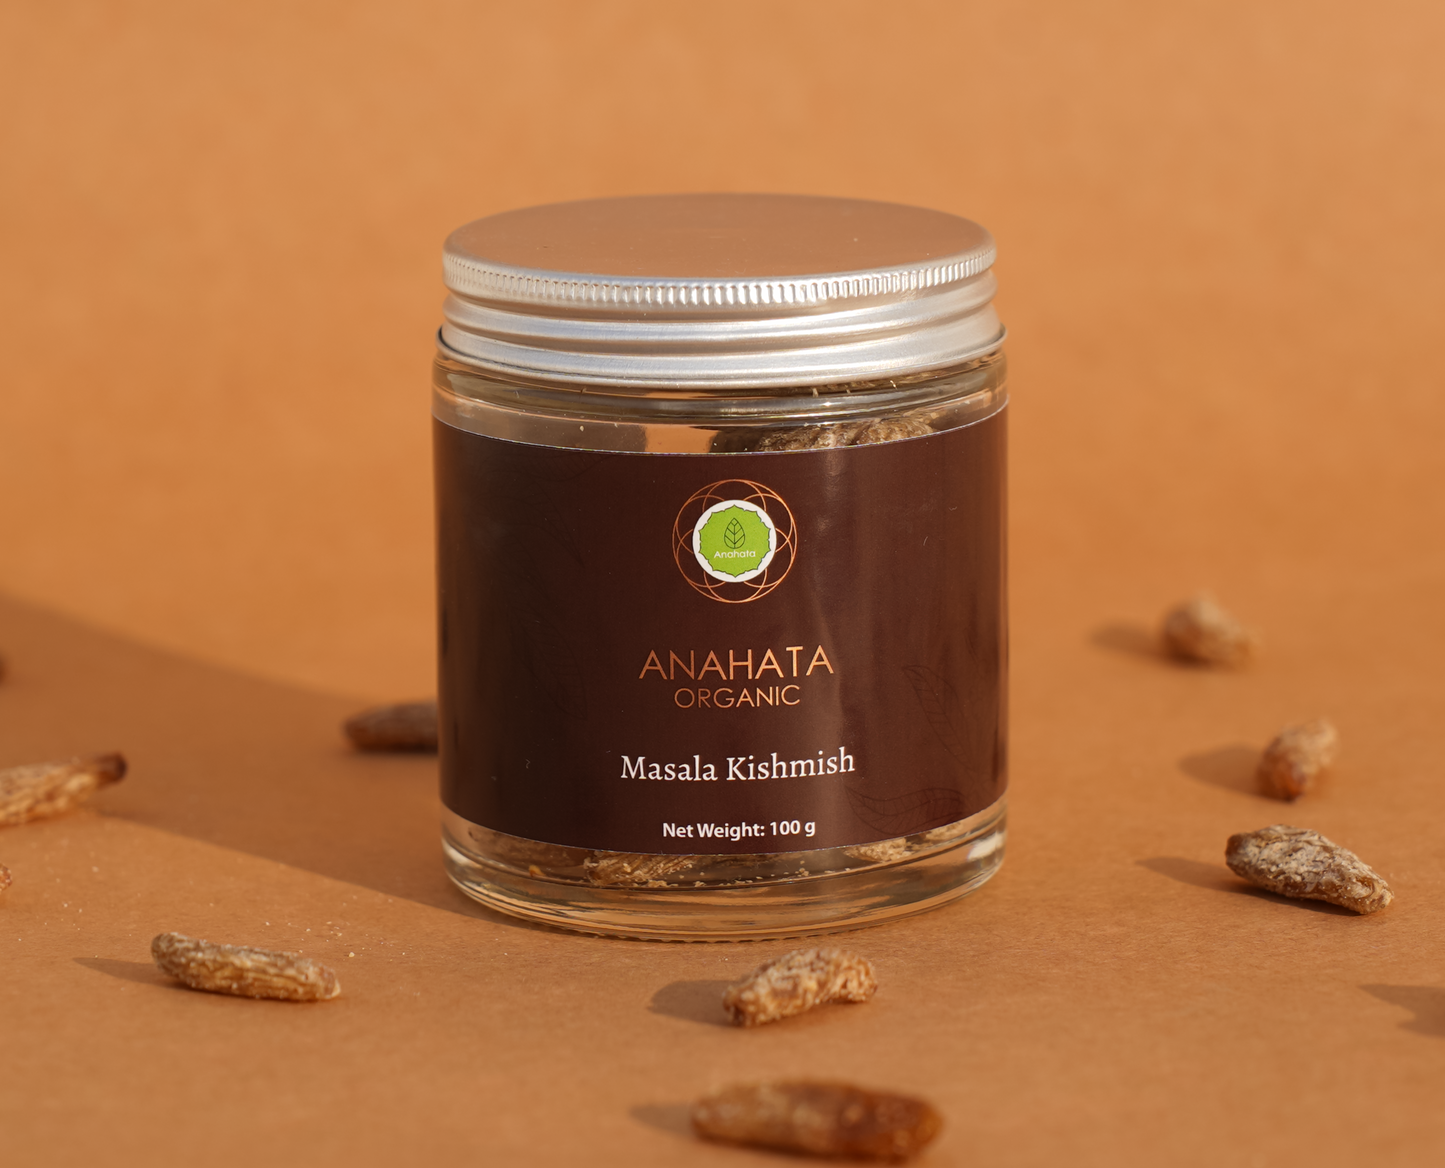 Anahata's masala kishmish is a tangy and healthy snack, packed with antioxidants, vitamins and essential nutrients that help boost immunity, aid digestion, cure anaemia and control blood pressure. Sourced from organic farmers, these raisins are handpicked, sun dried and  avoured with fresh spices and other condiments.